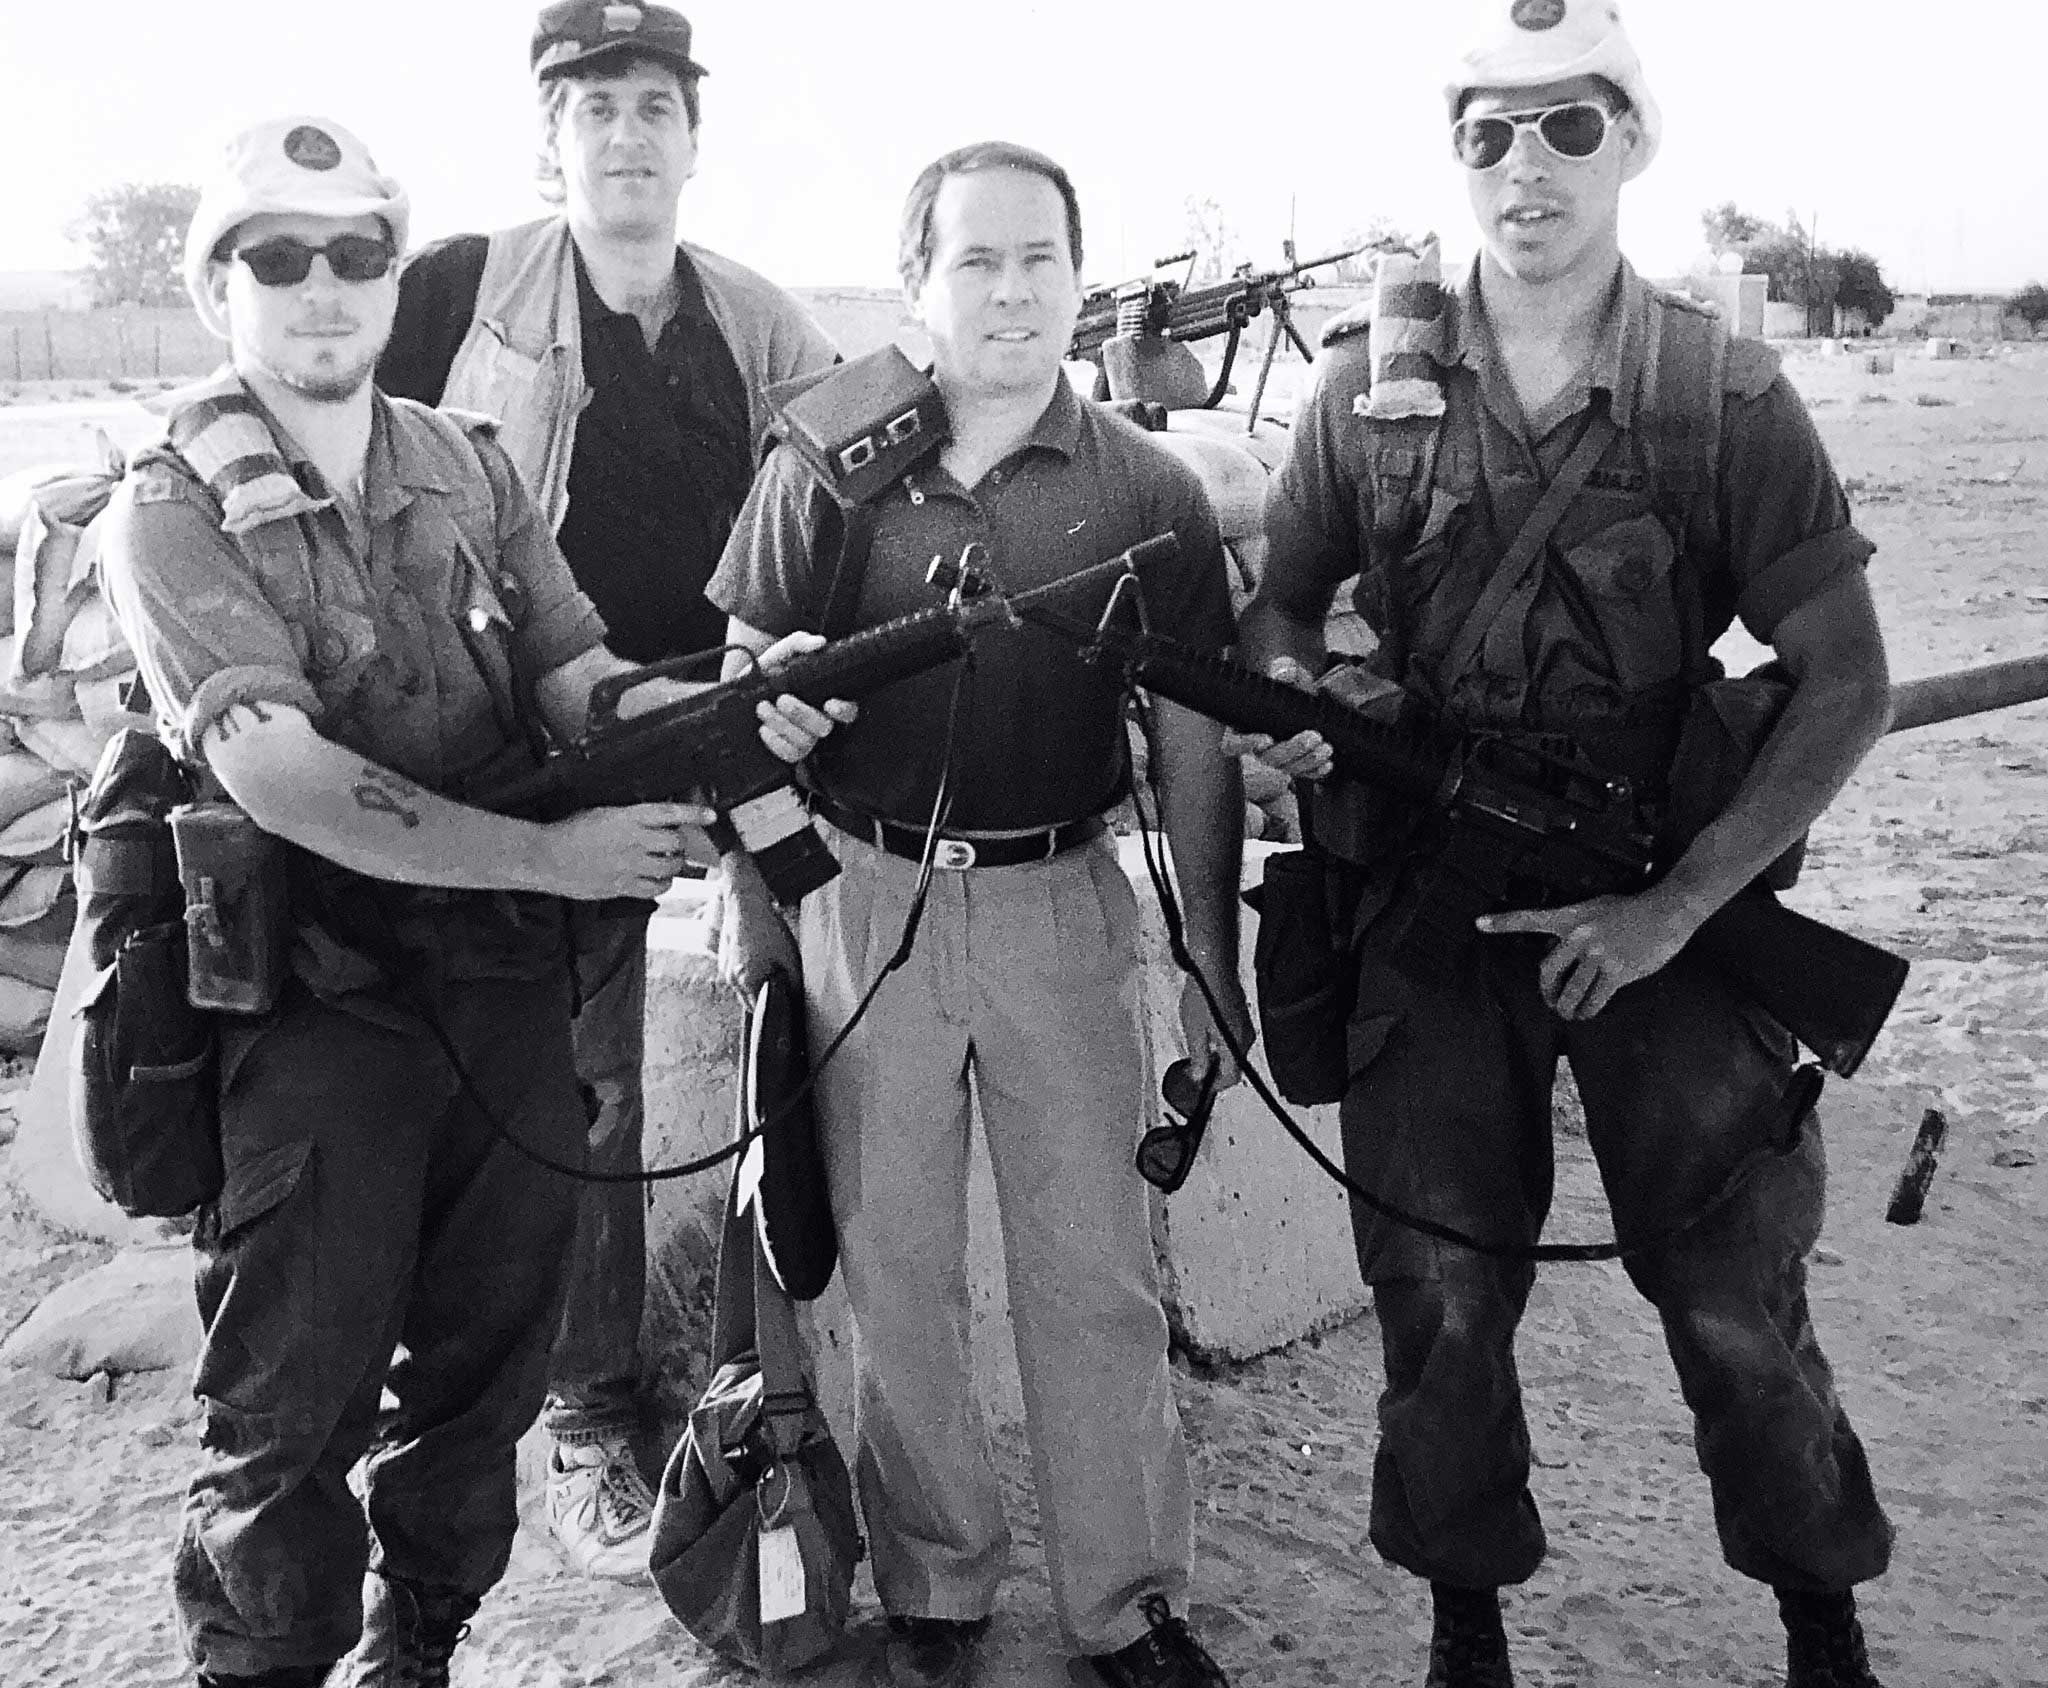 Senator Munson (third from left) and cameraman Mike Nolan (second from left) near Doha, Qatar during the First Gulf War. (Photo credit: Mike Nolan)